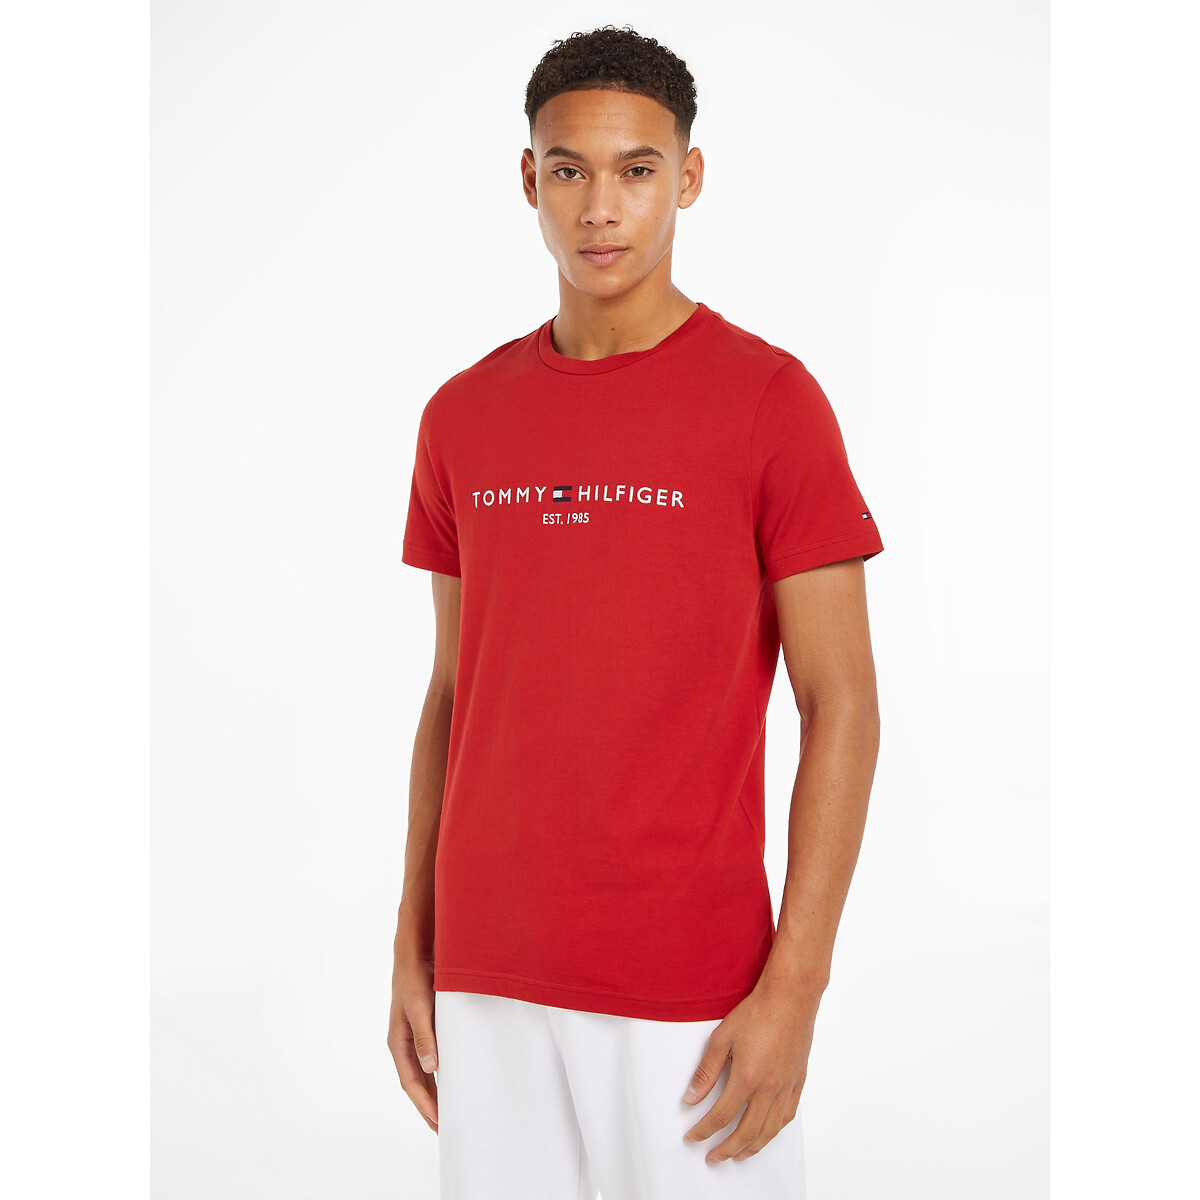 Embroidered Logo Cotton T-Shirt with Crew Neck and Short Sleeves